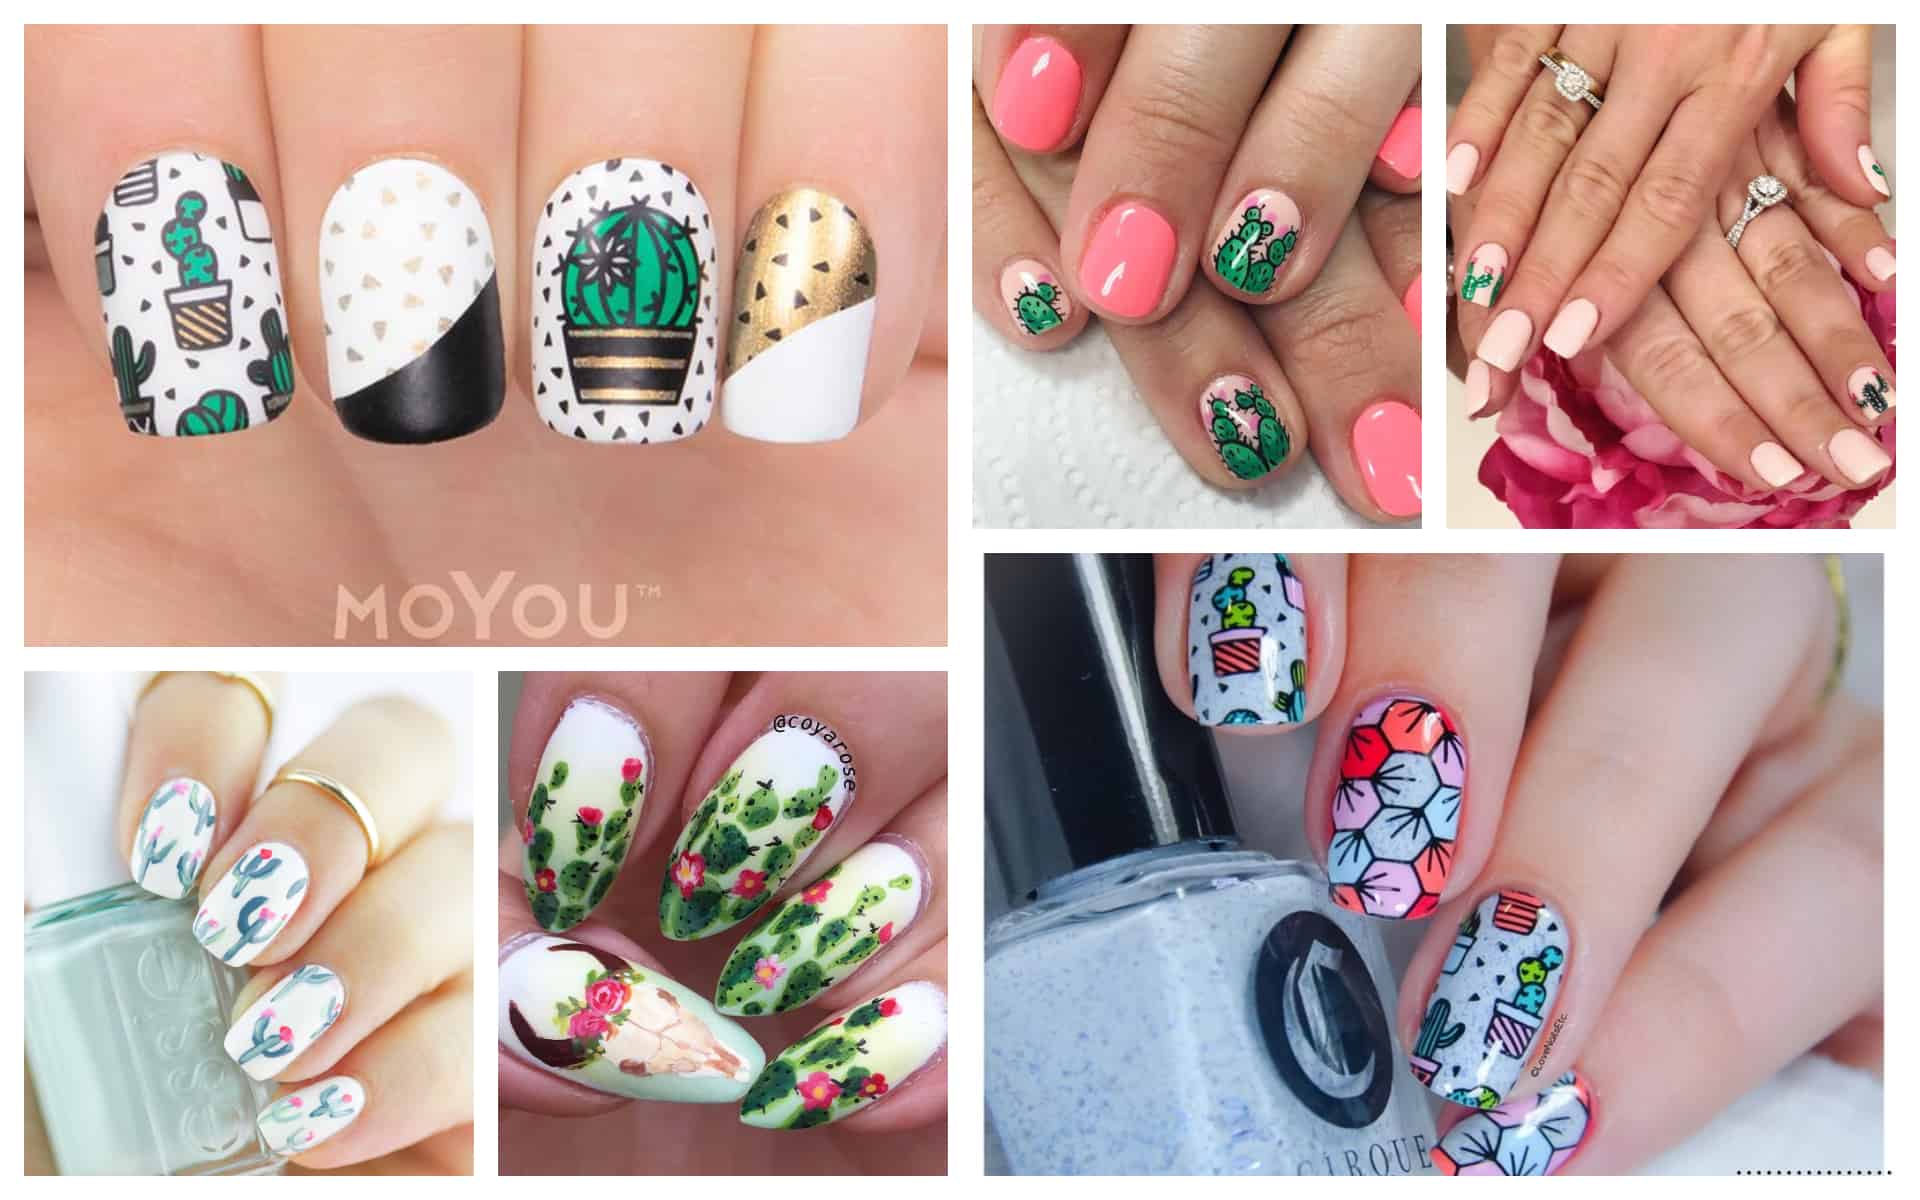 5. Cactus Flower Nail Art Step by Step - wide 4